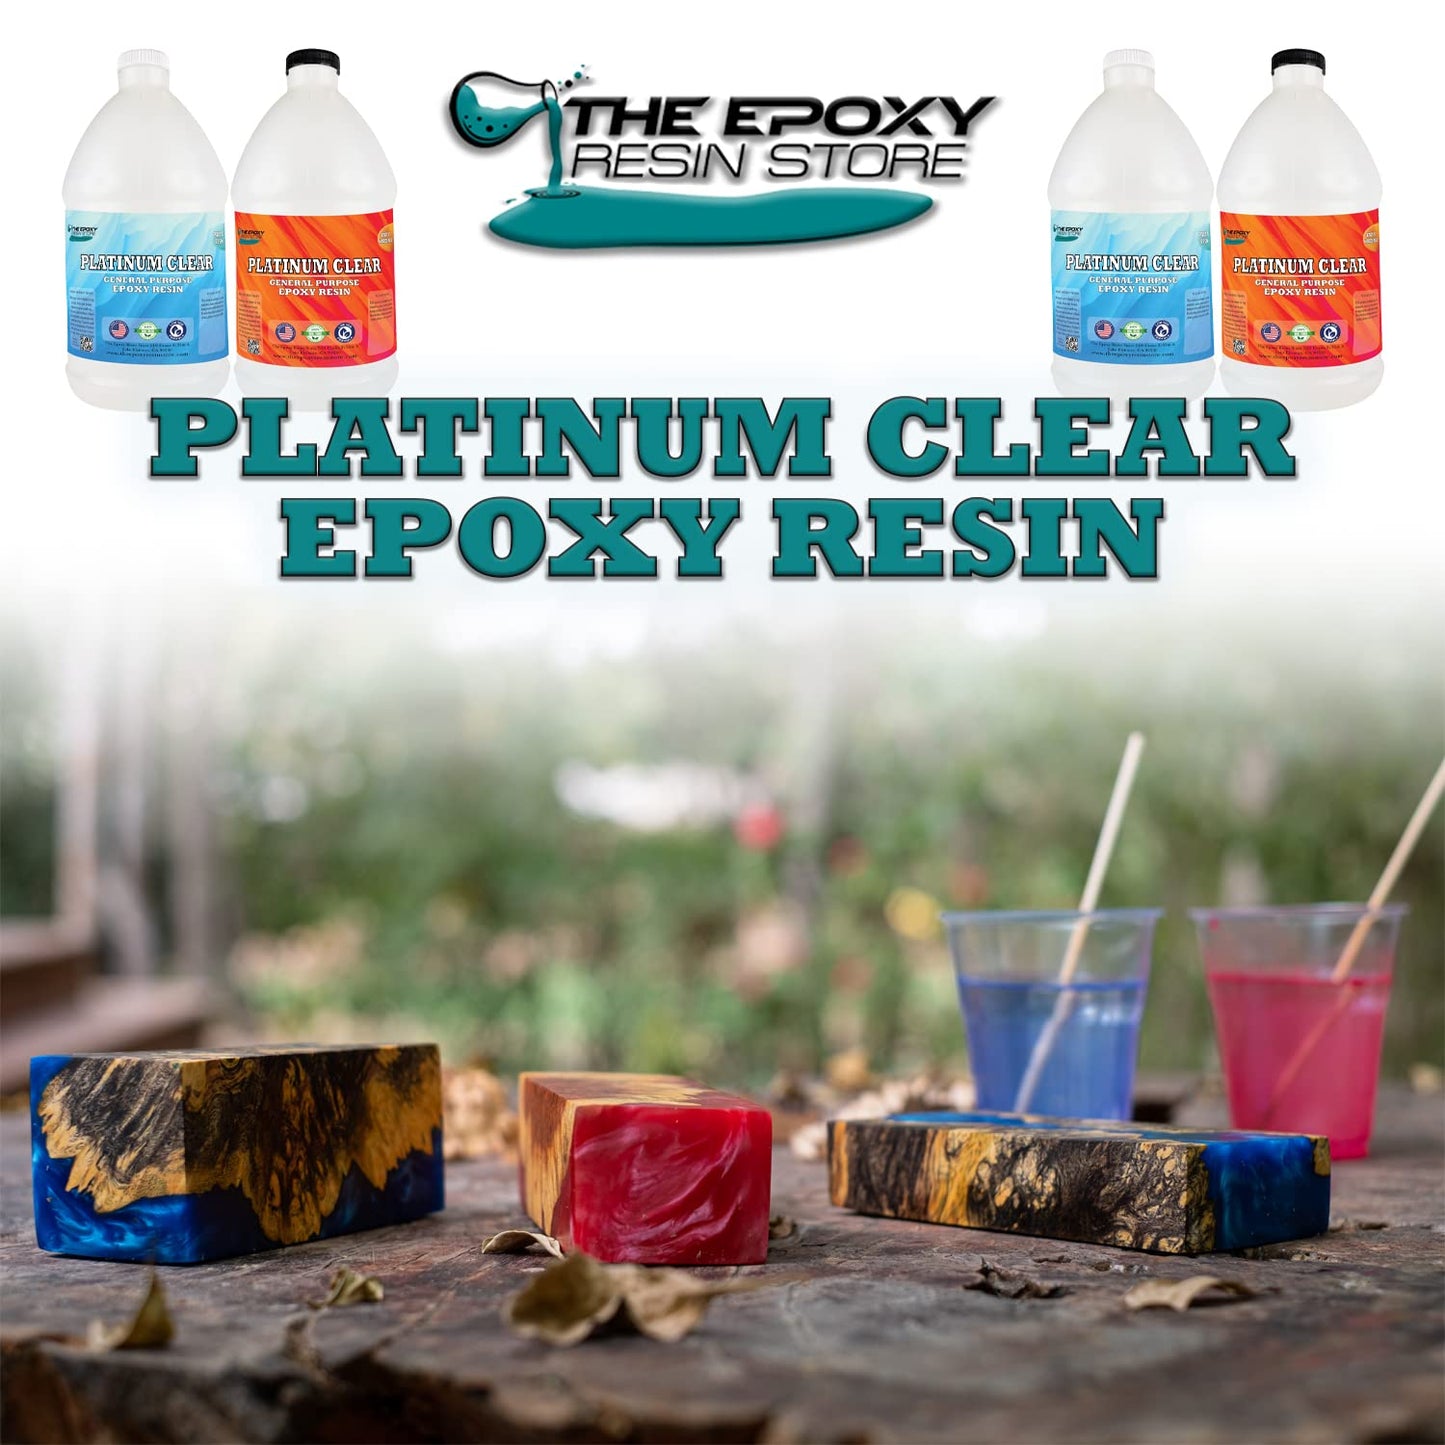 The Epoxy Resin Store - Clear Epoxy Resin, Easy Mixing (1-1), Tabletops, Coasters, Jewelry, Concrete, Art, Crafts, 2 Part Epoxy - 1 Gallon Kit